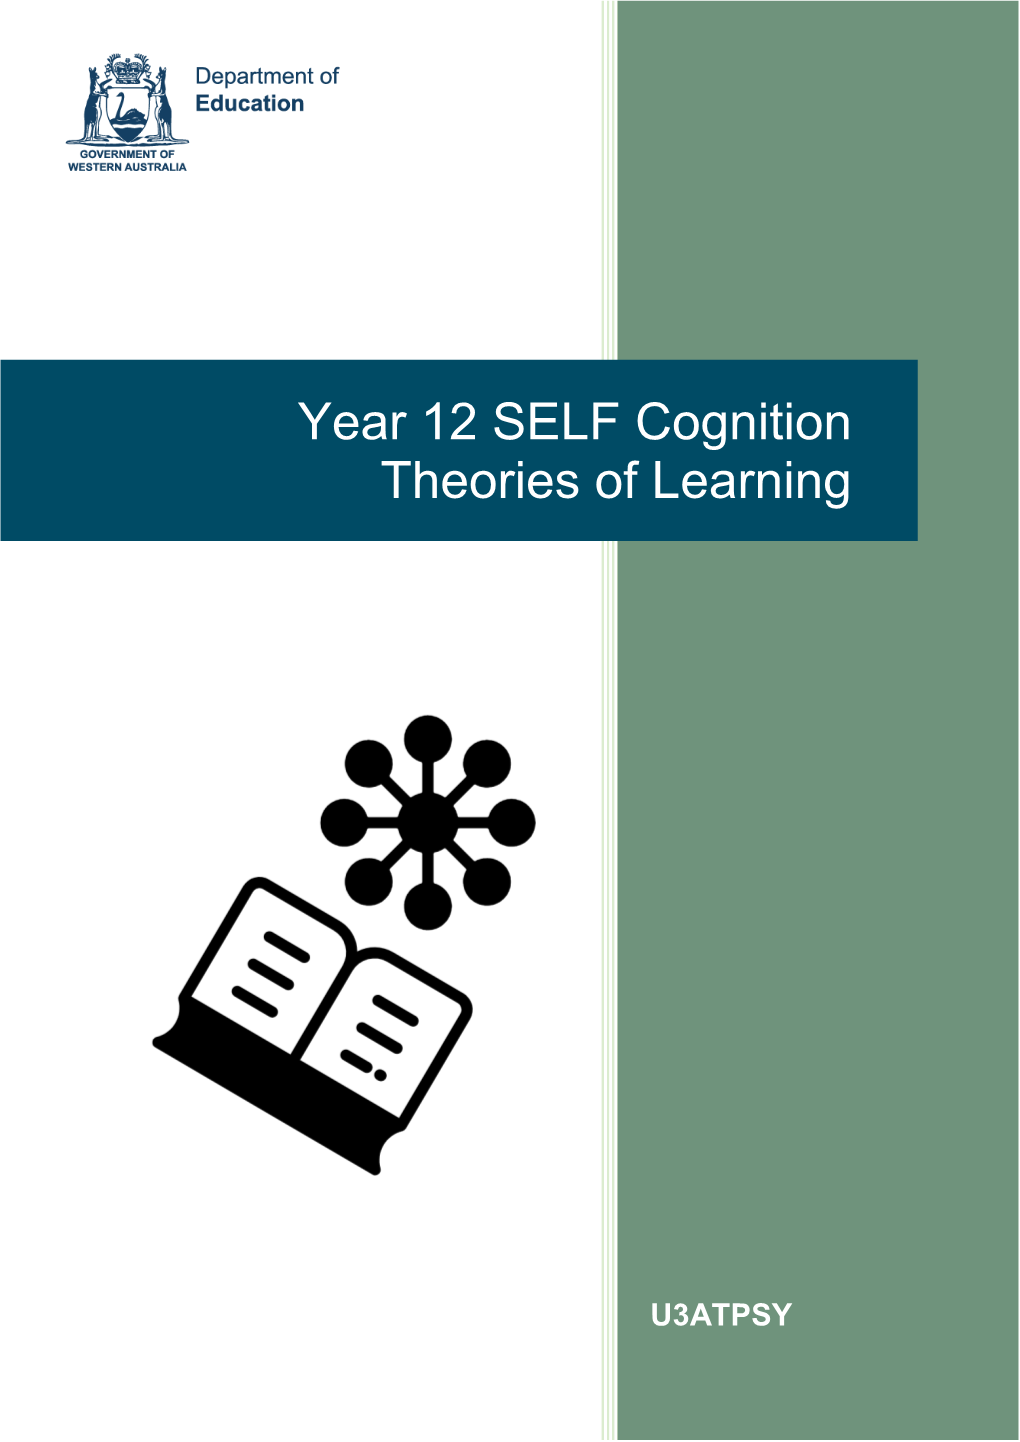 Year 12 SELF Cognition Theories of Learning